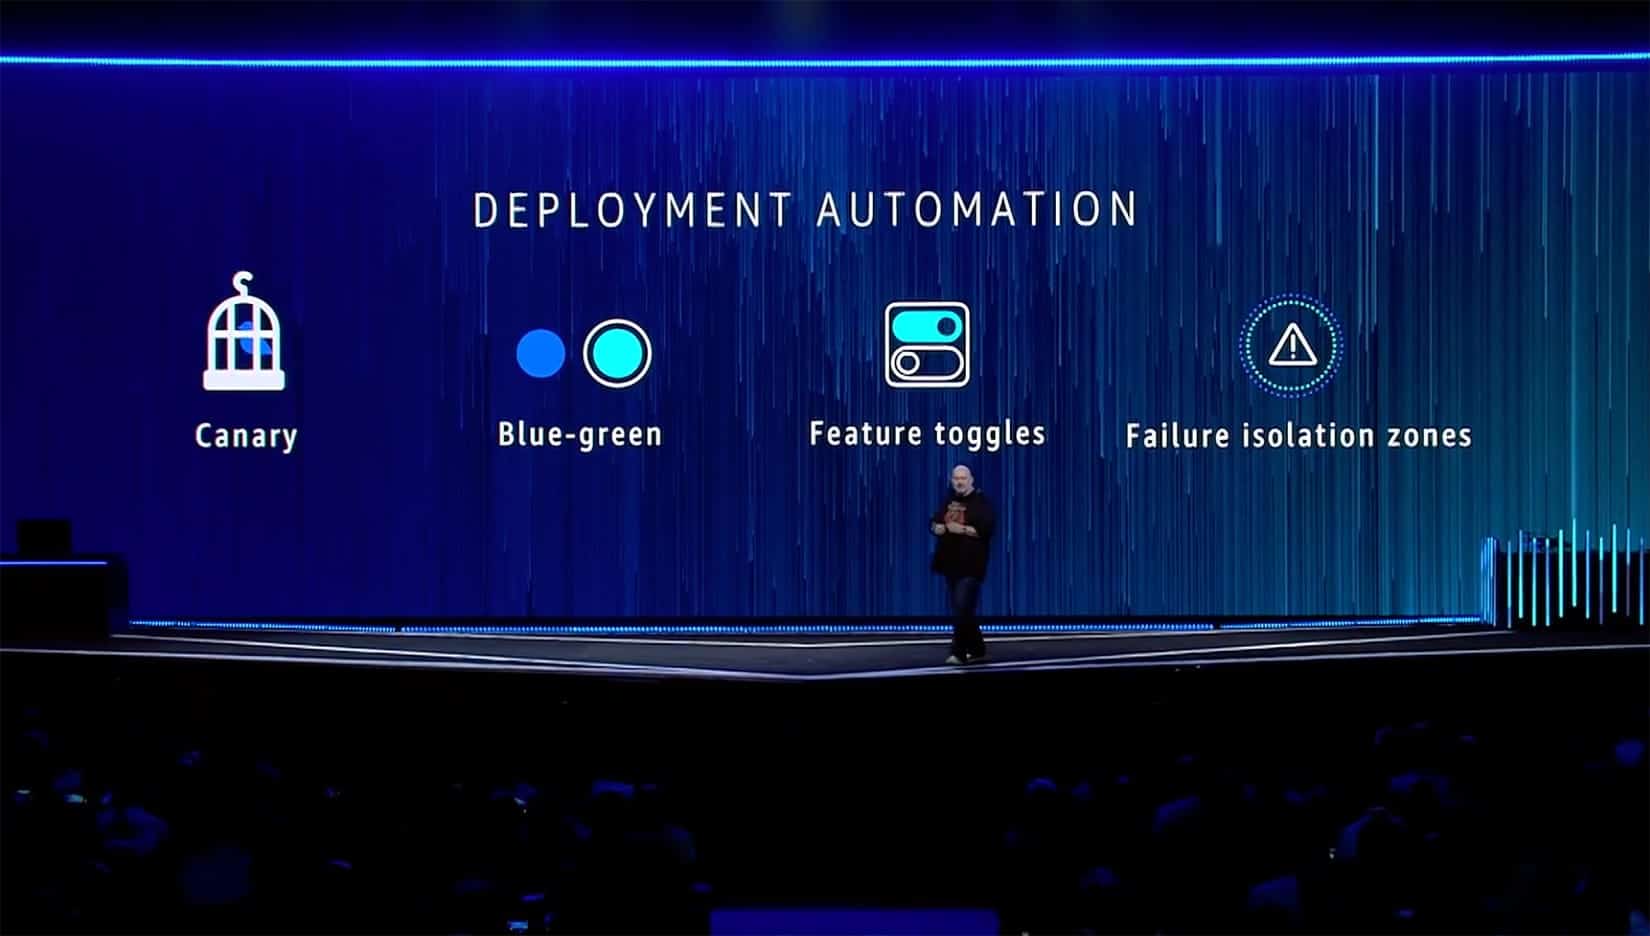 Amazon covered feature flags during their keynote at AWS re:Invent